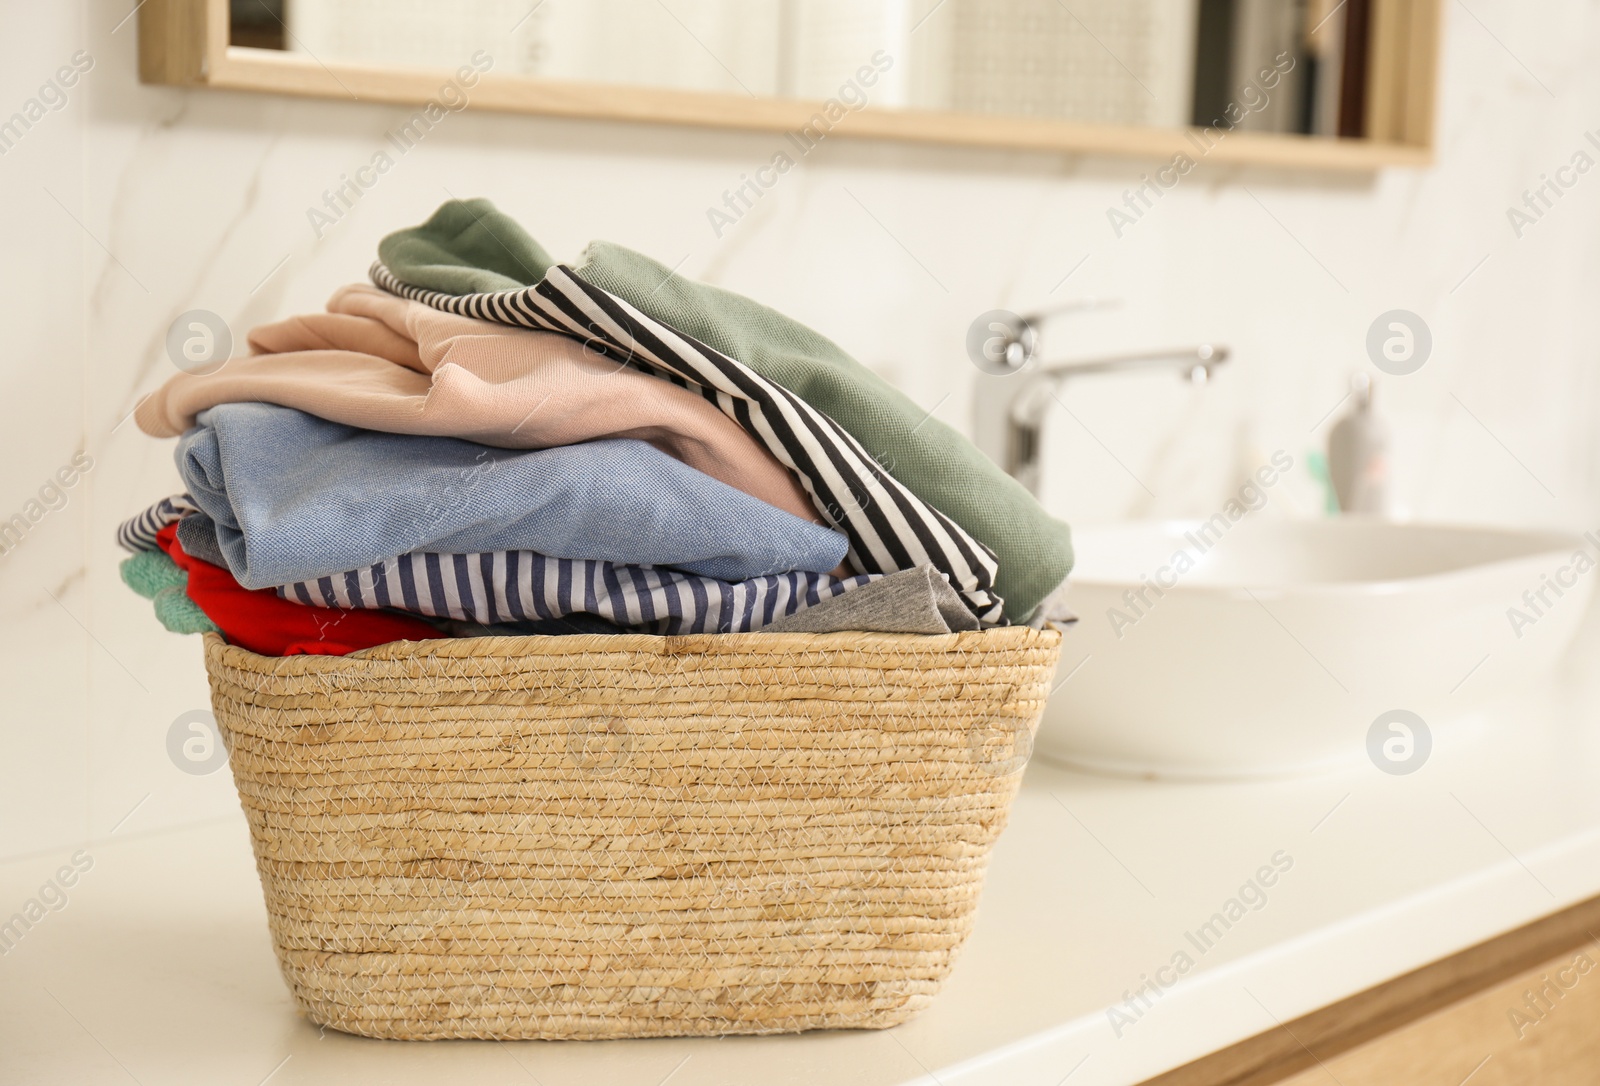 Photo of Wicker basket with laundry on countertop in bathroom